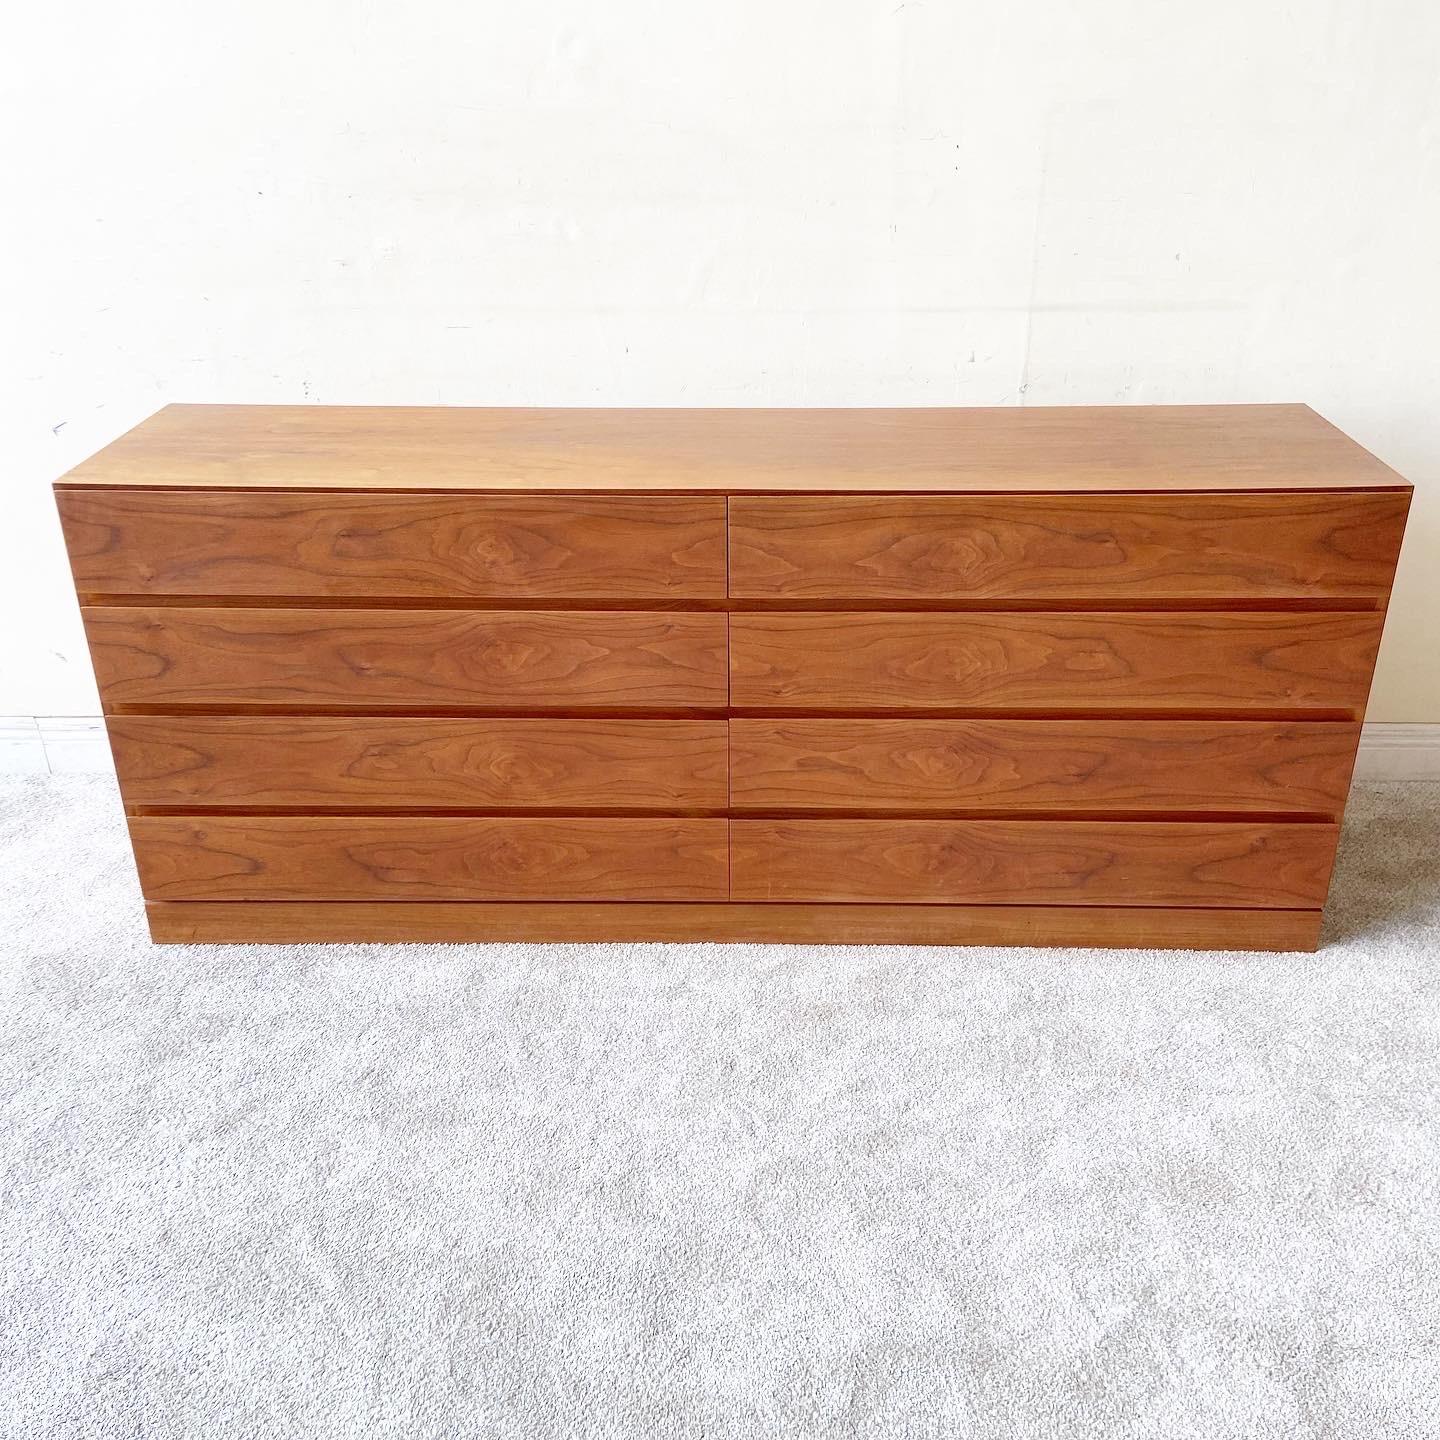 Exceptional mid century Danish modern 8 drawer lowboy dresser by Arne Wahl Iverson for Vinde Mobelfabrik. Features 8 spacious drawers with all original finish.